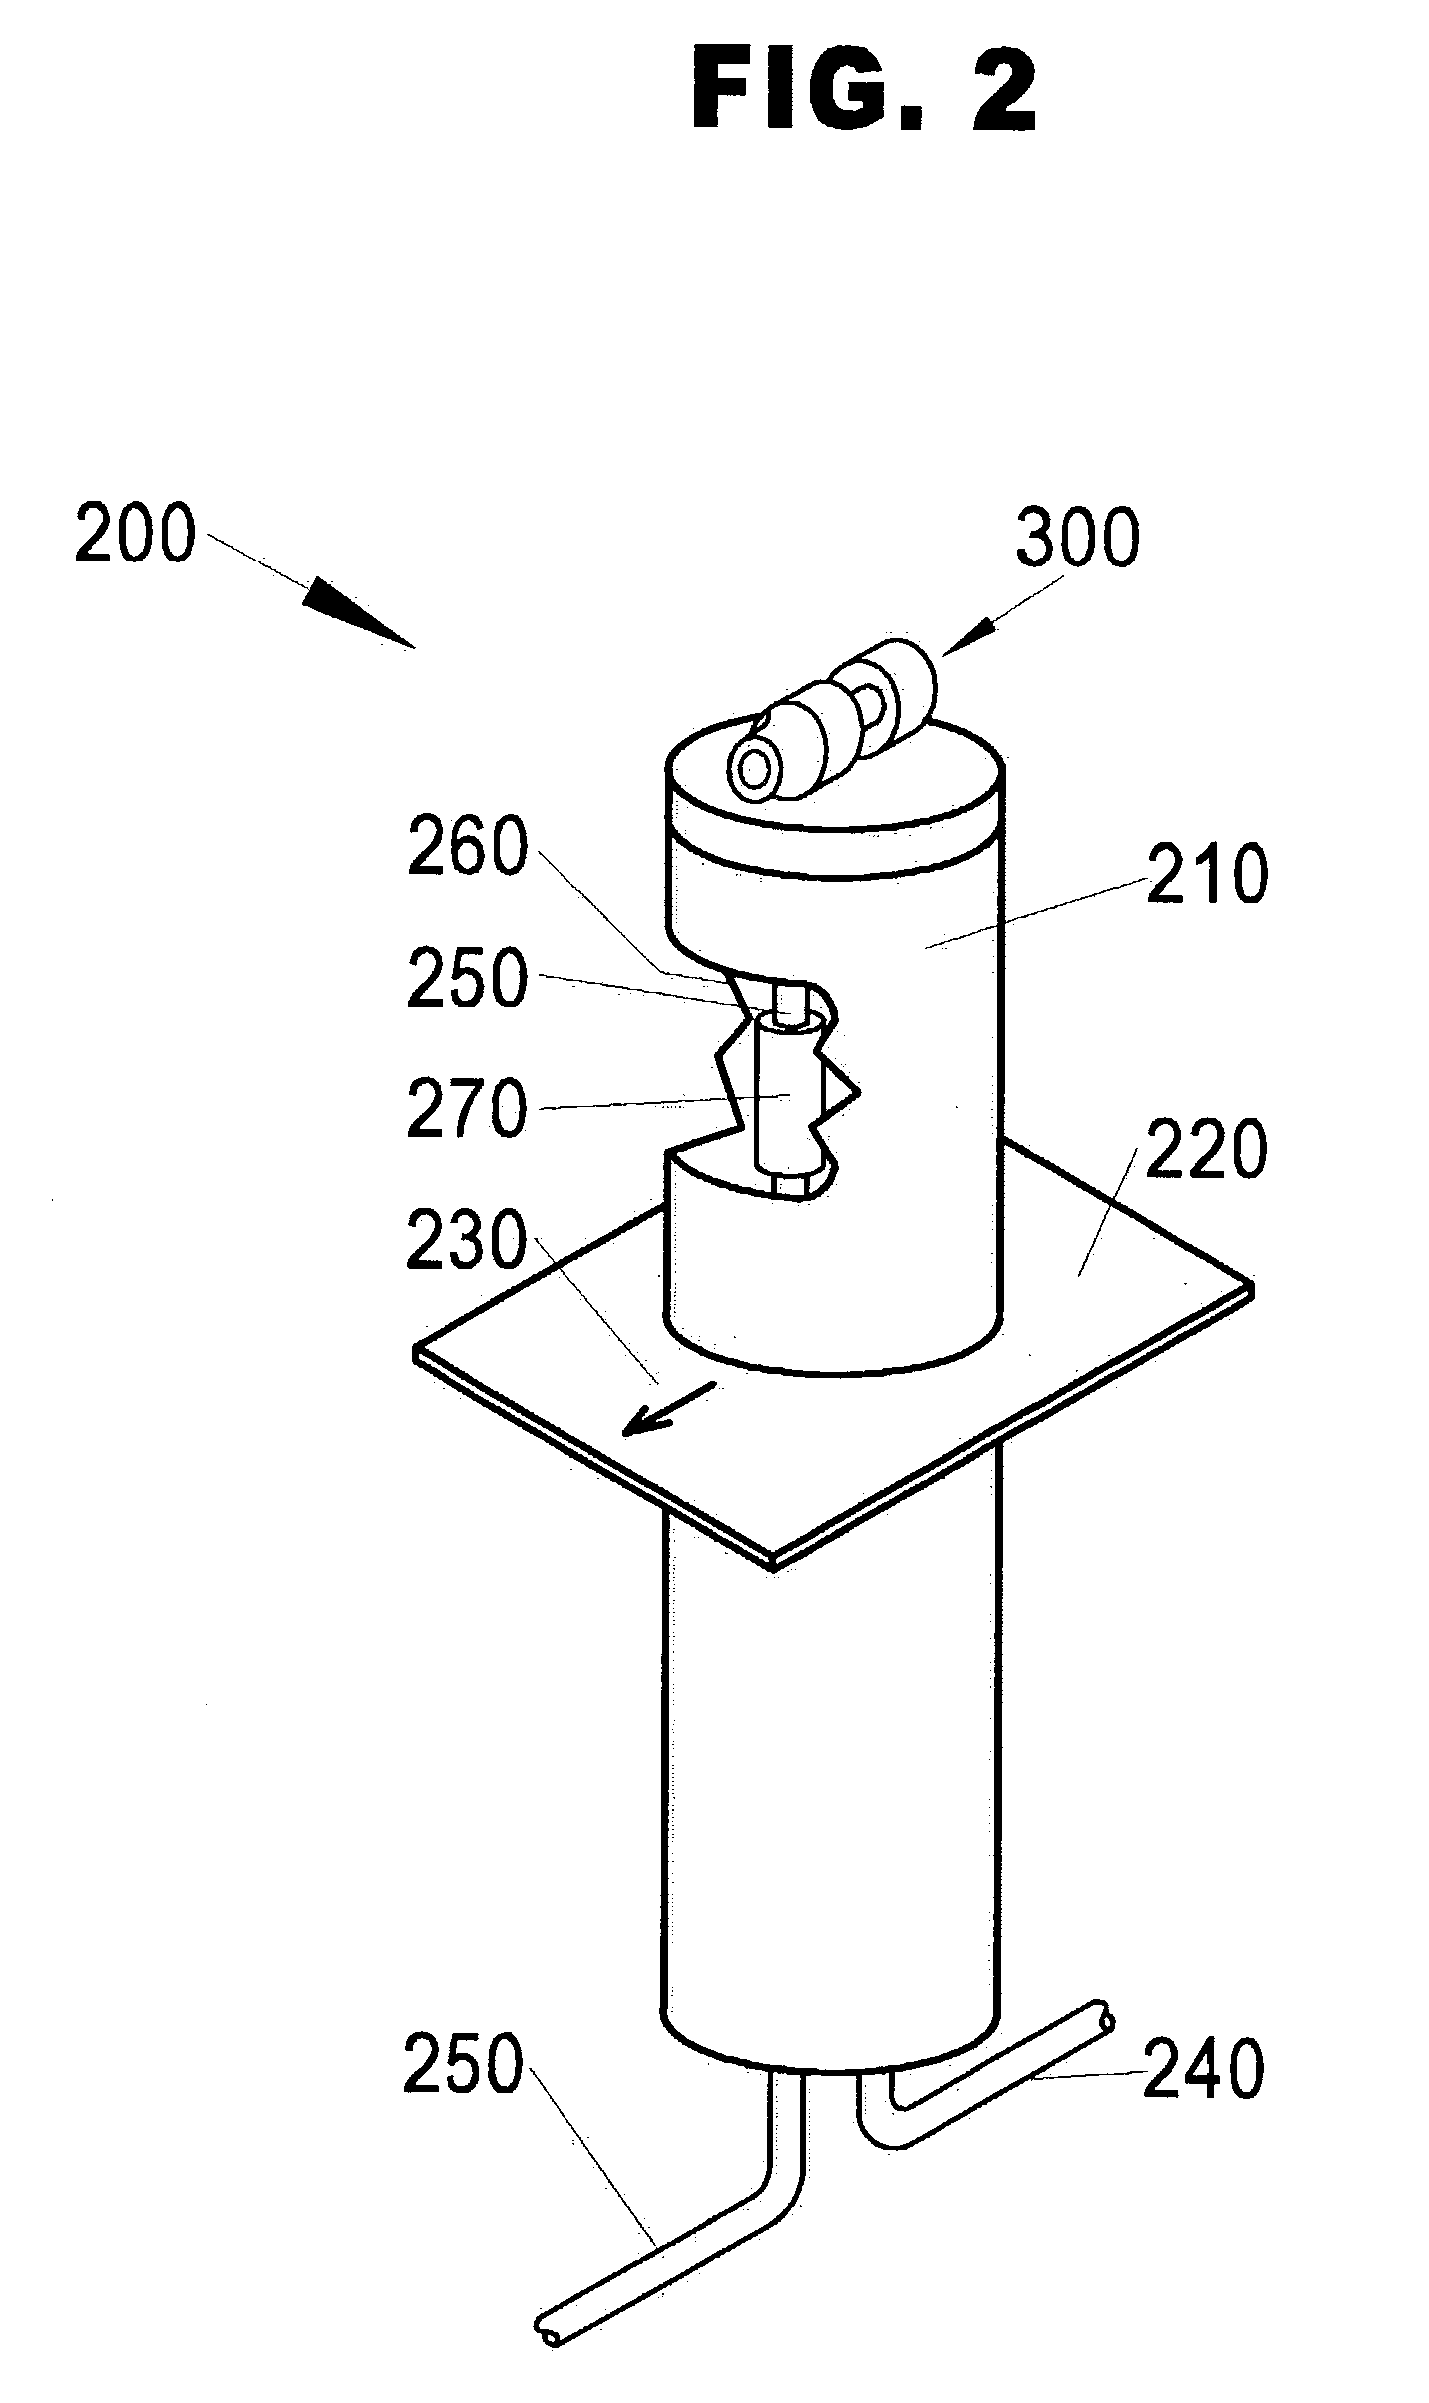 Method and apparatus for duct sealing using a clog-resistant insertable injector